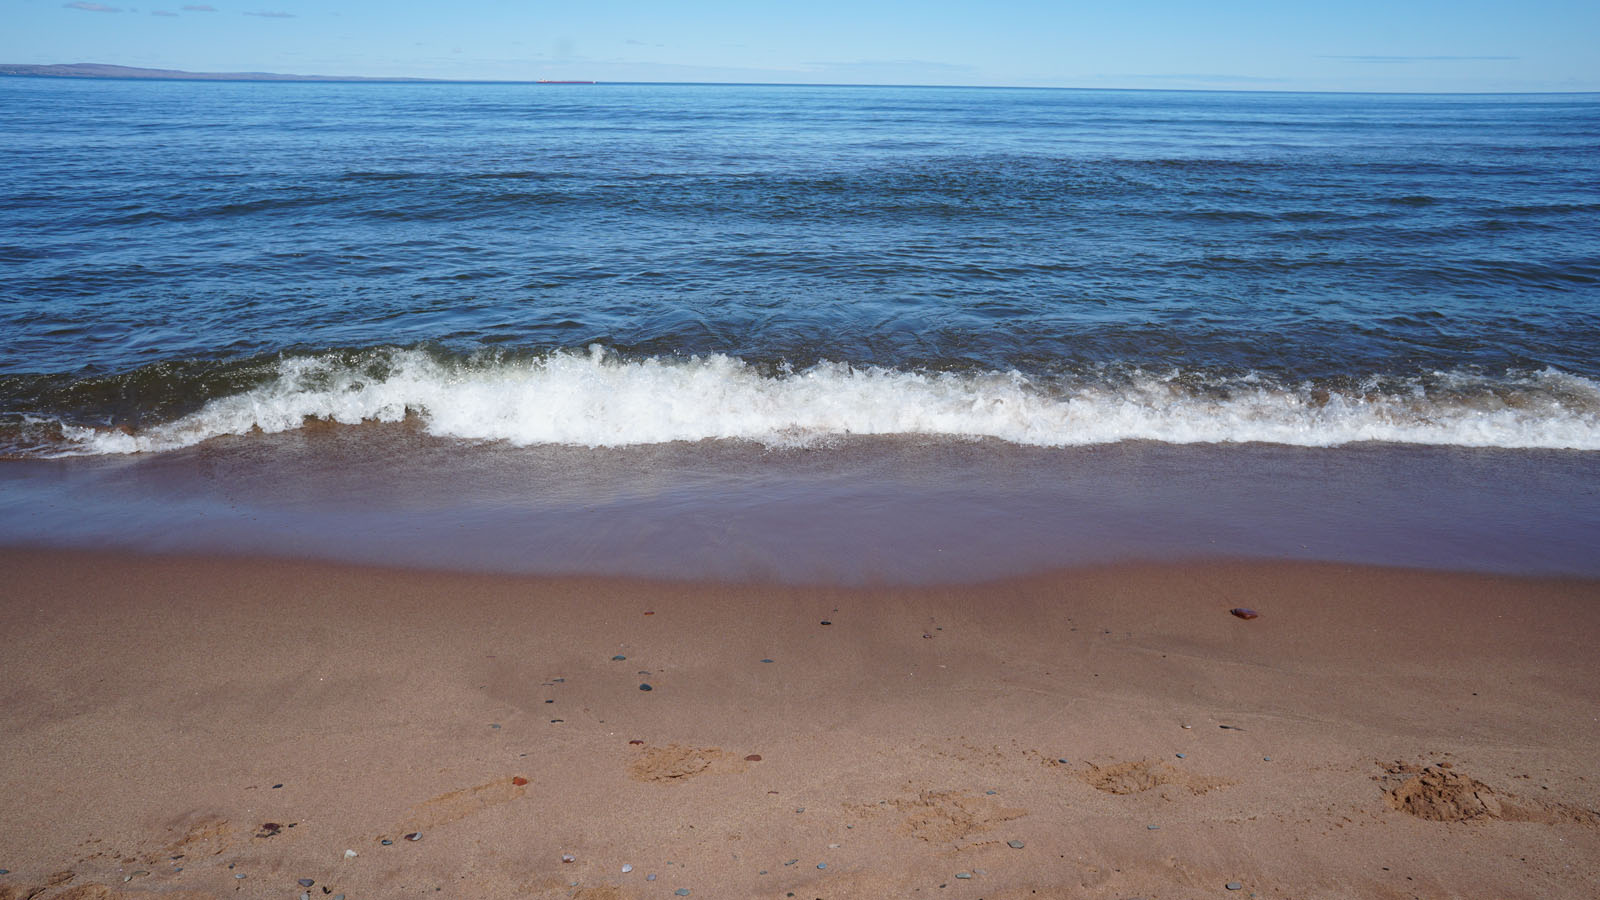 A sandy beach with small waves and ripples coming to shore